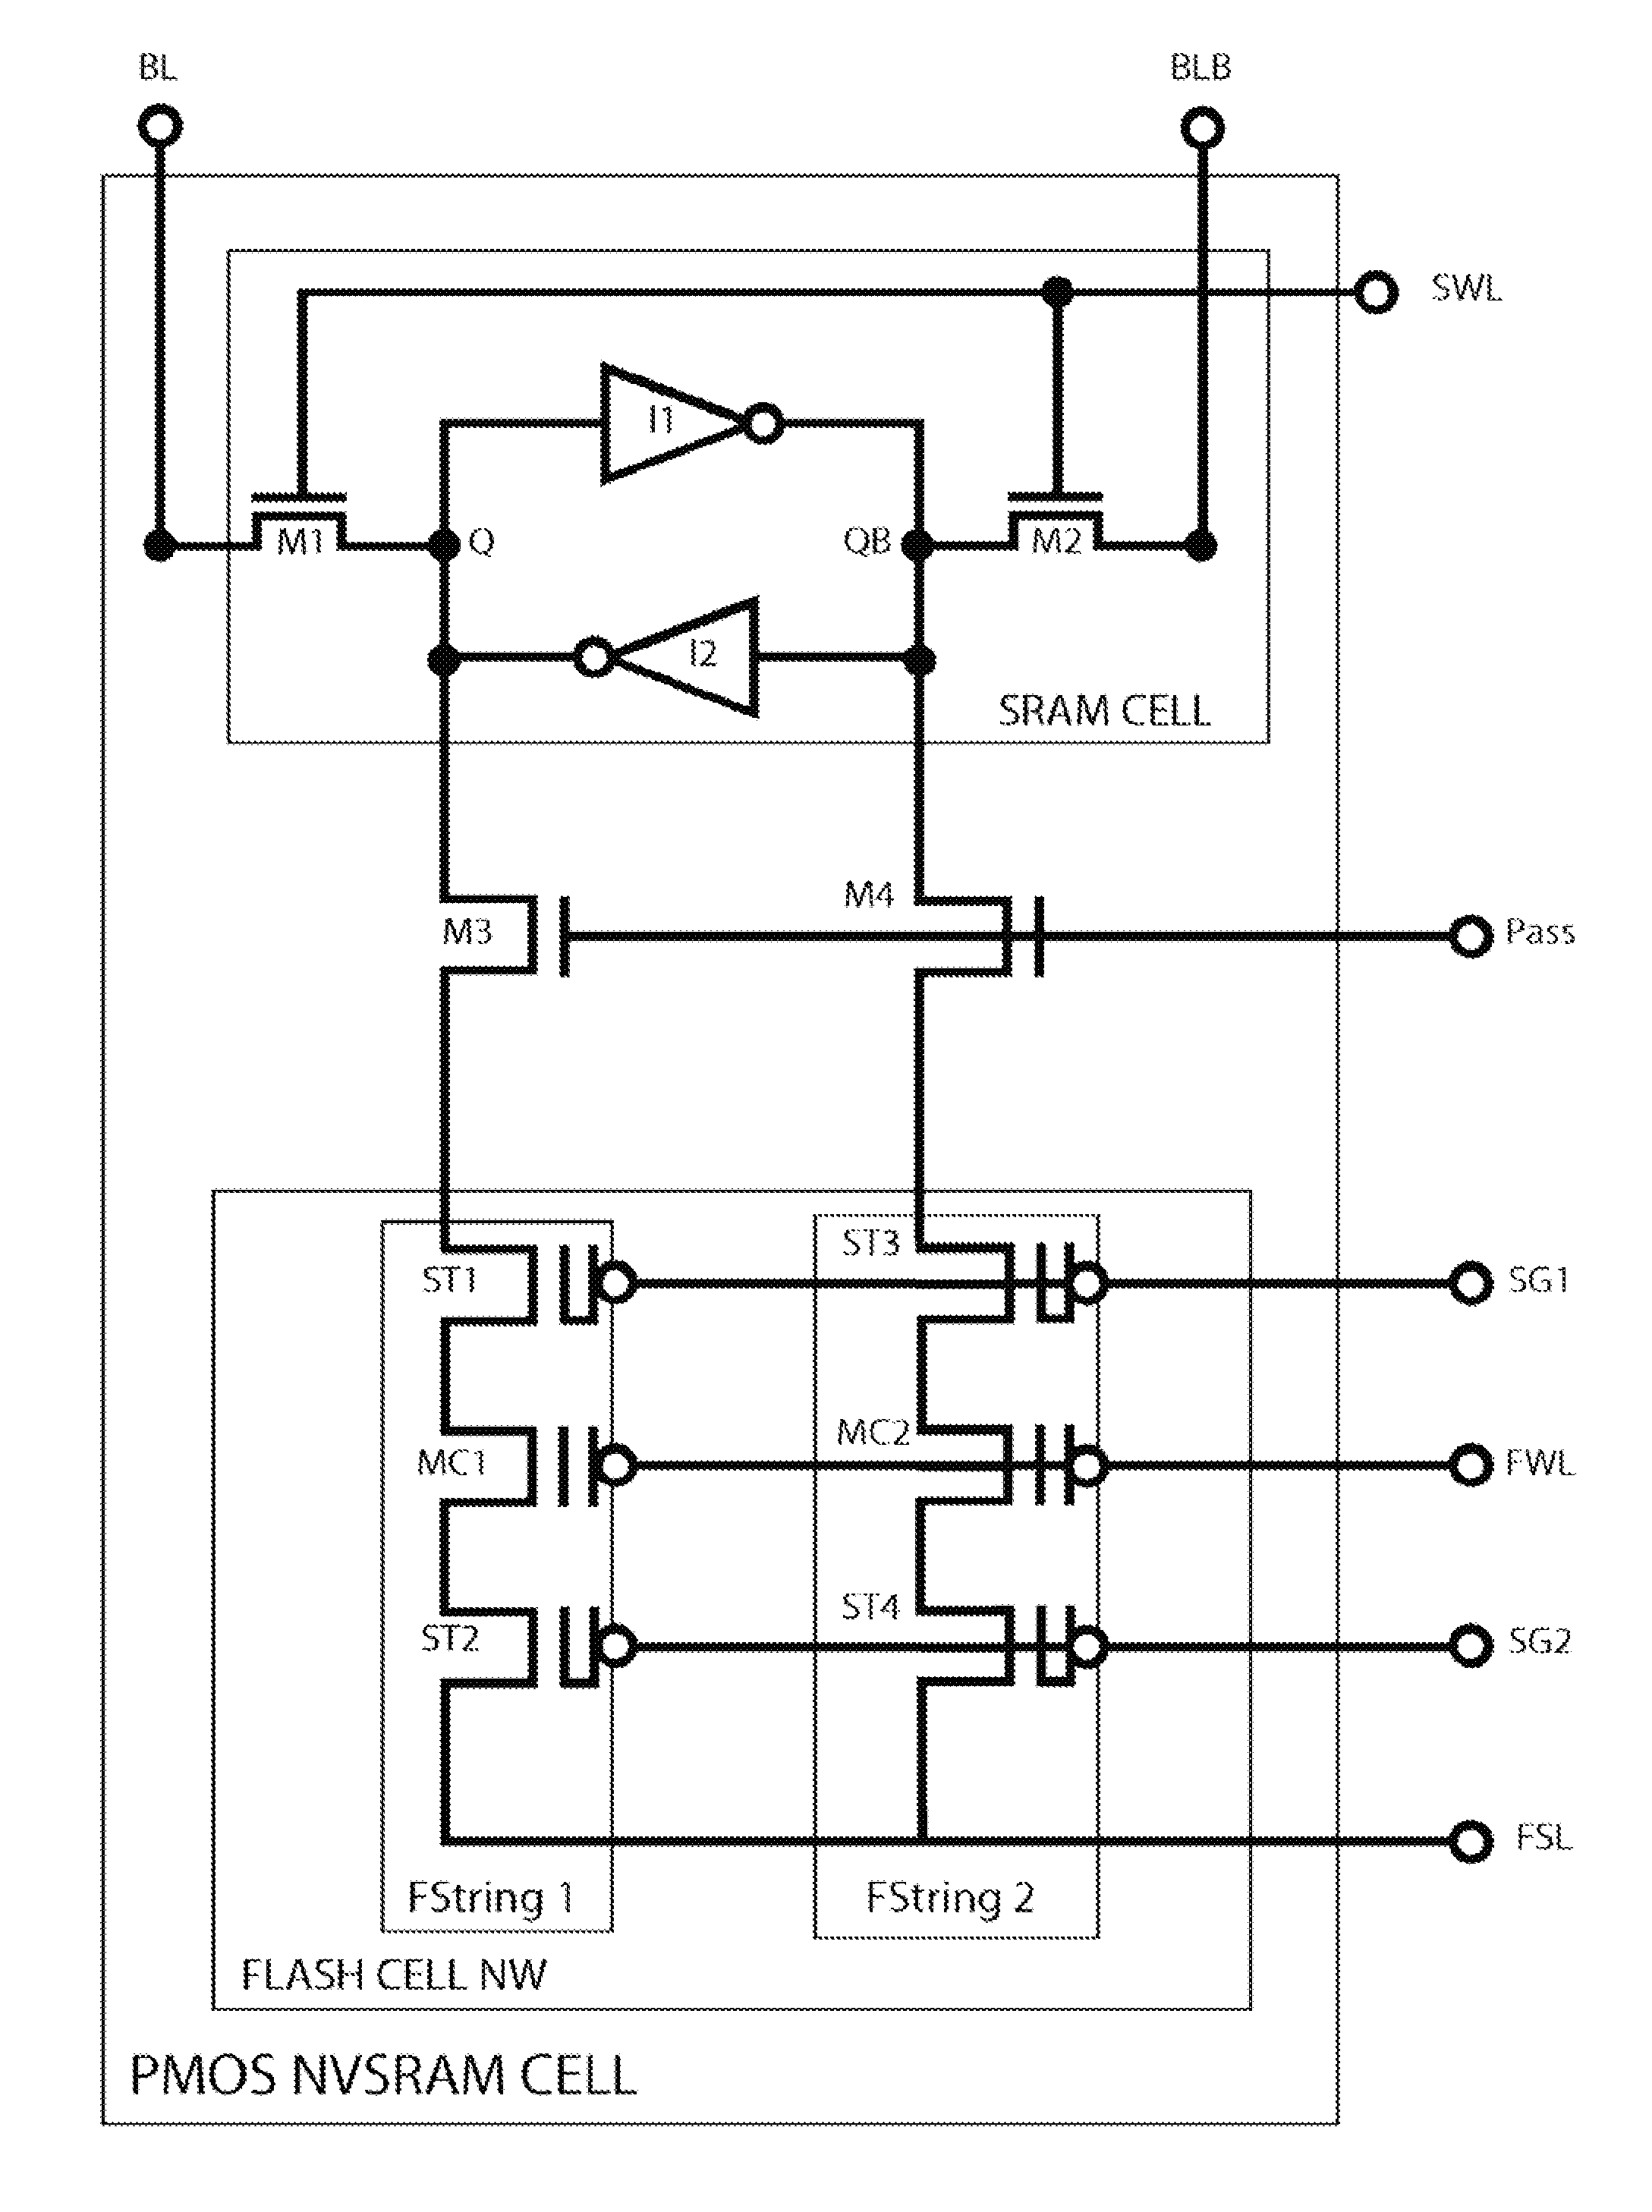 Low-voltage fast-write PMOS nvsram cell